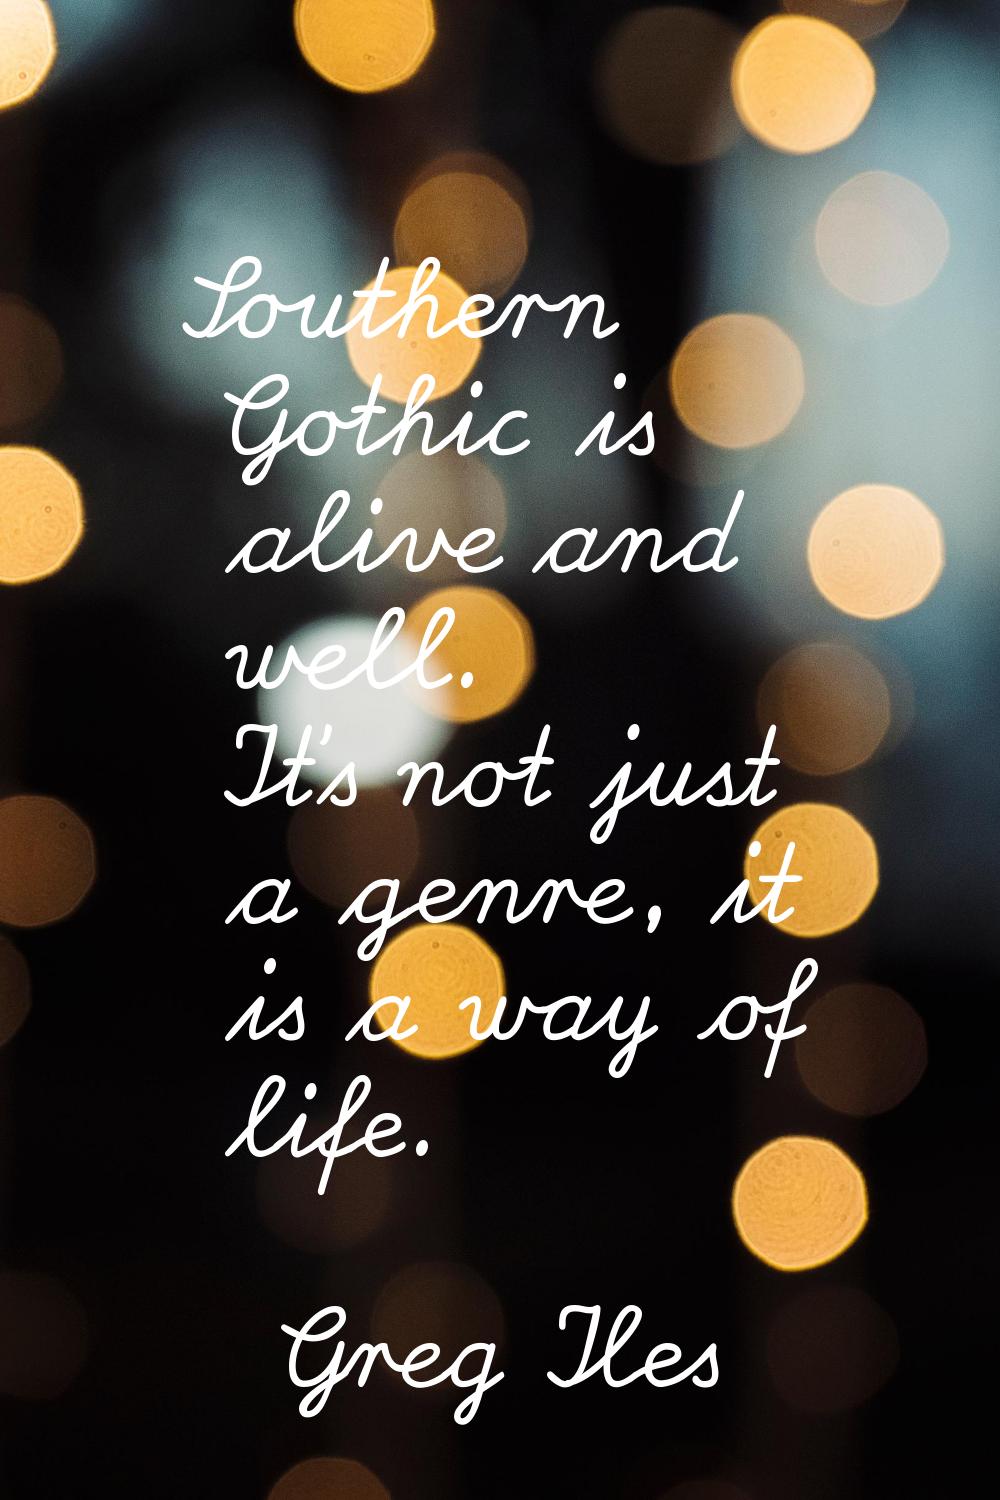 Southern Gothic is alive and well. It's not just a genre, it is a way of life.